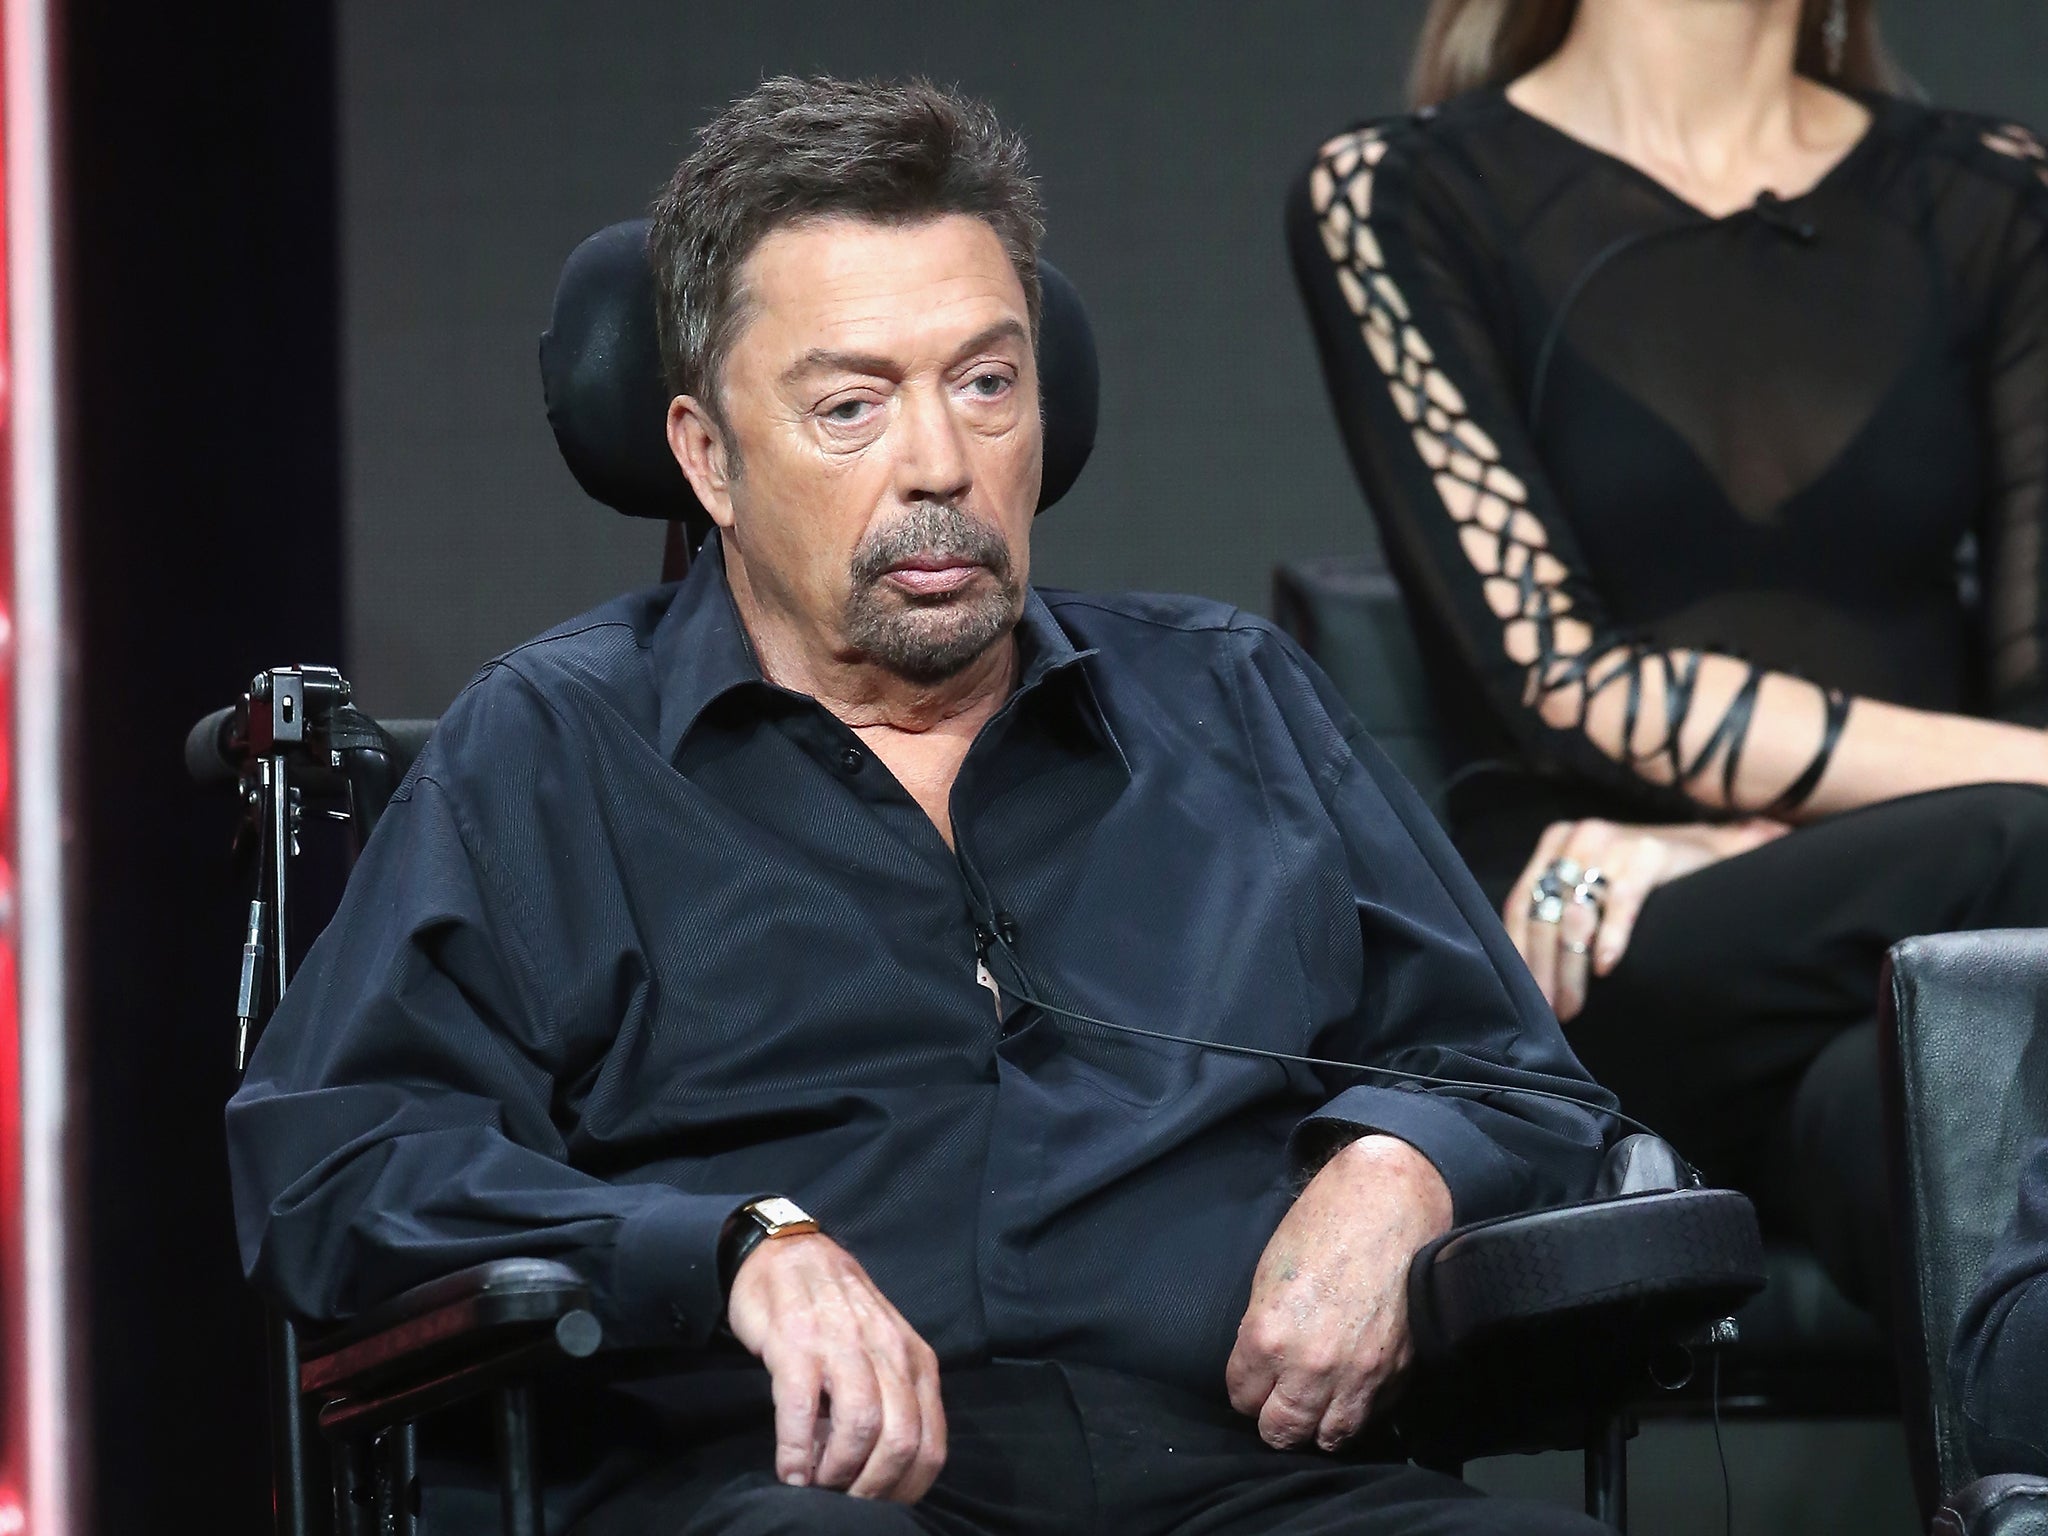 Tim Curry to make rare public appearance eight years after stroke The